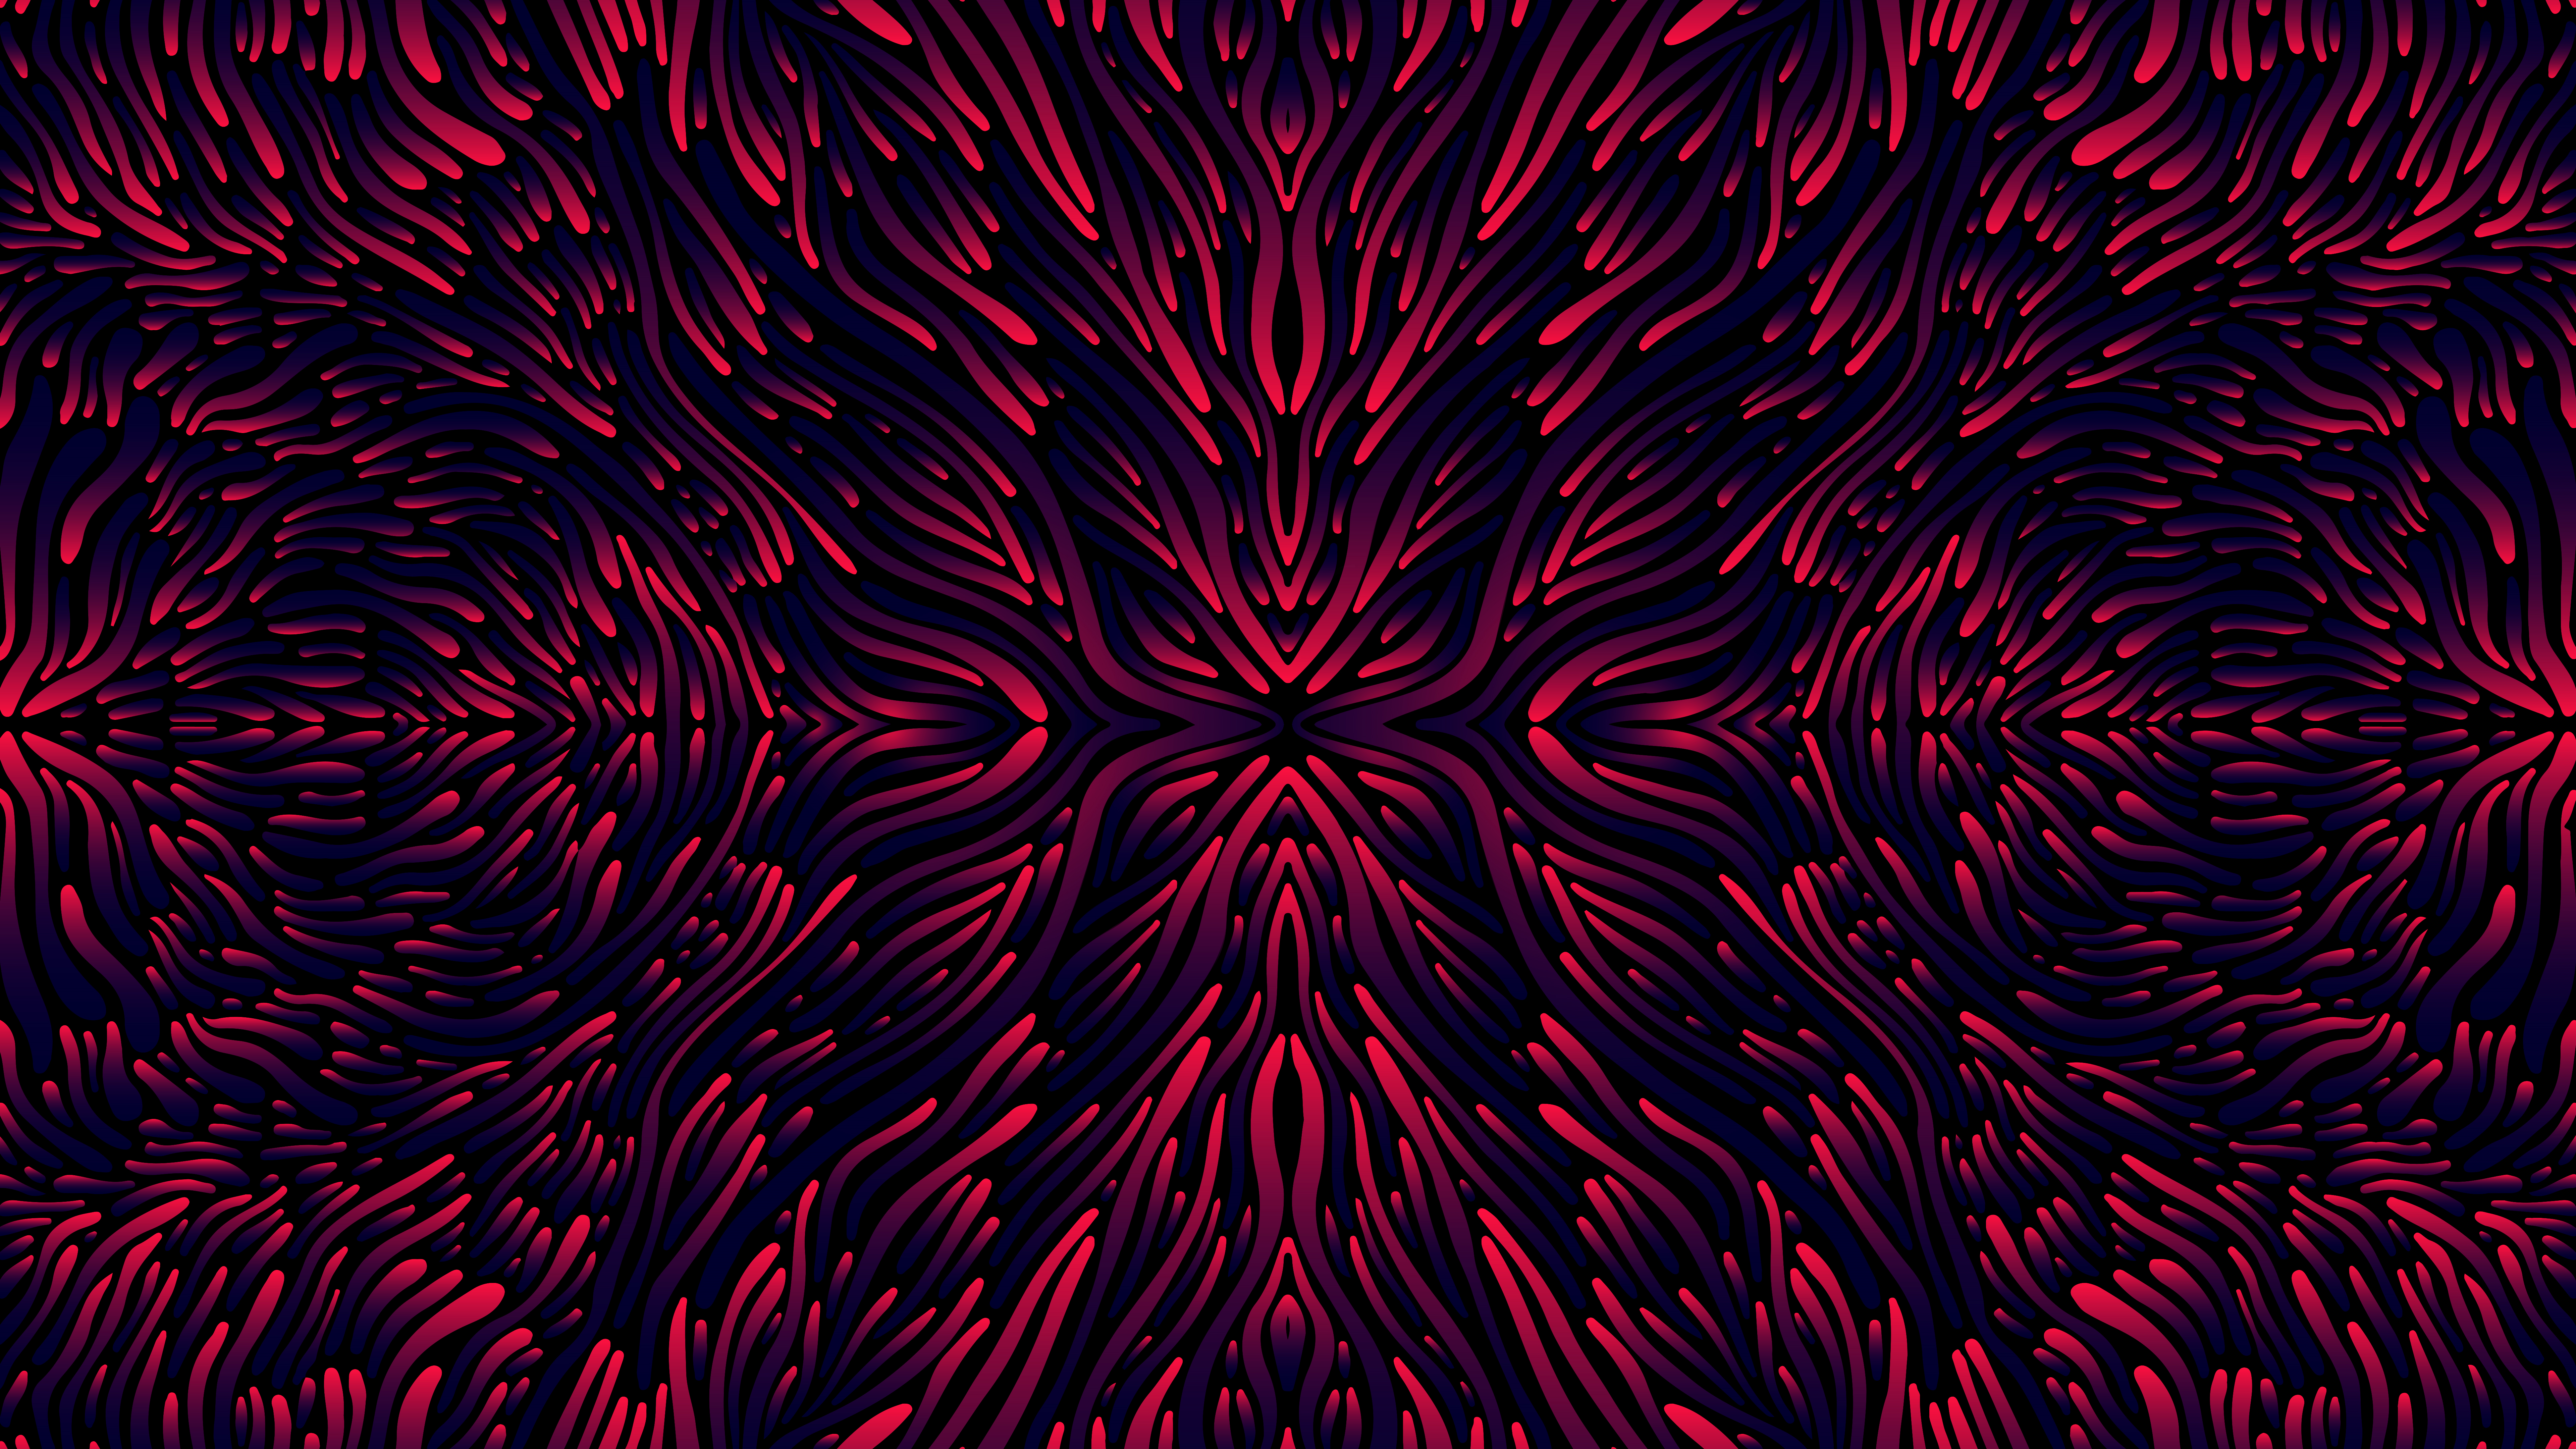 General 7680x4320 simple background pattern abstract 4K symmetry